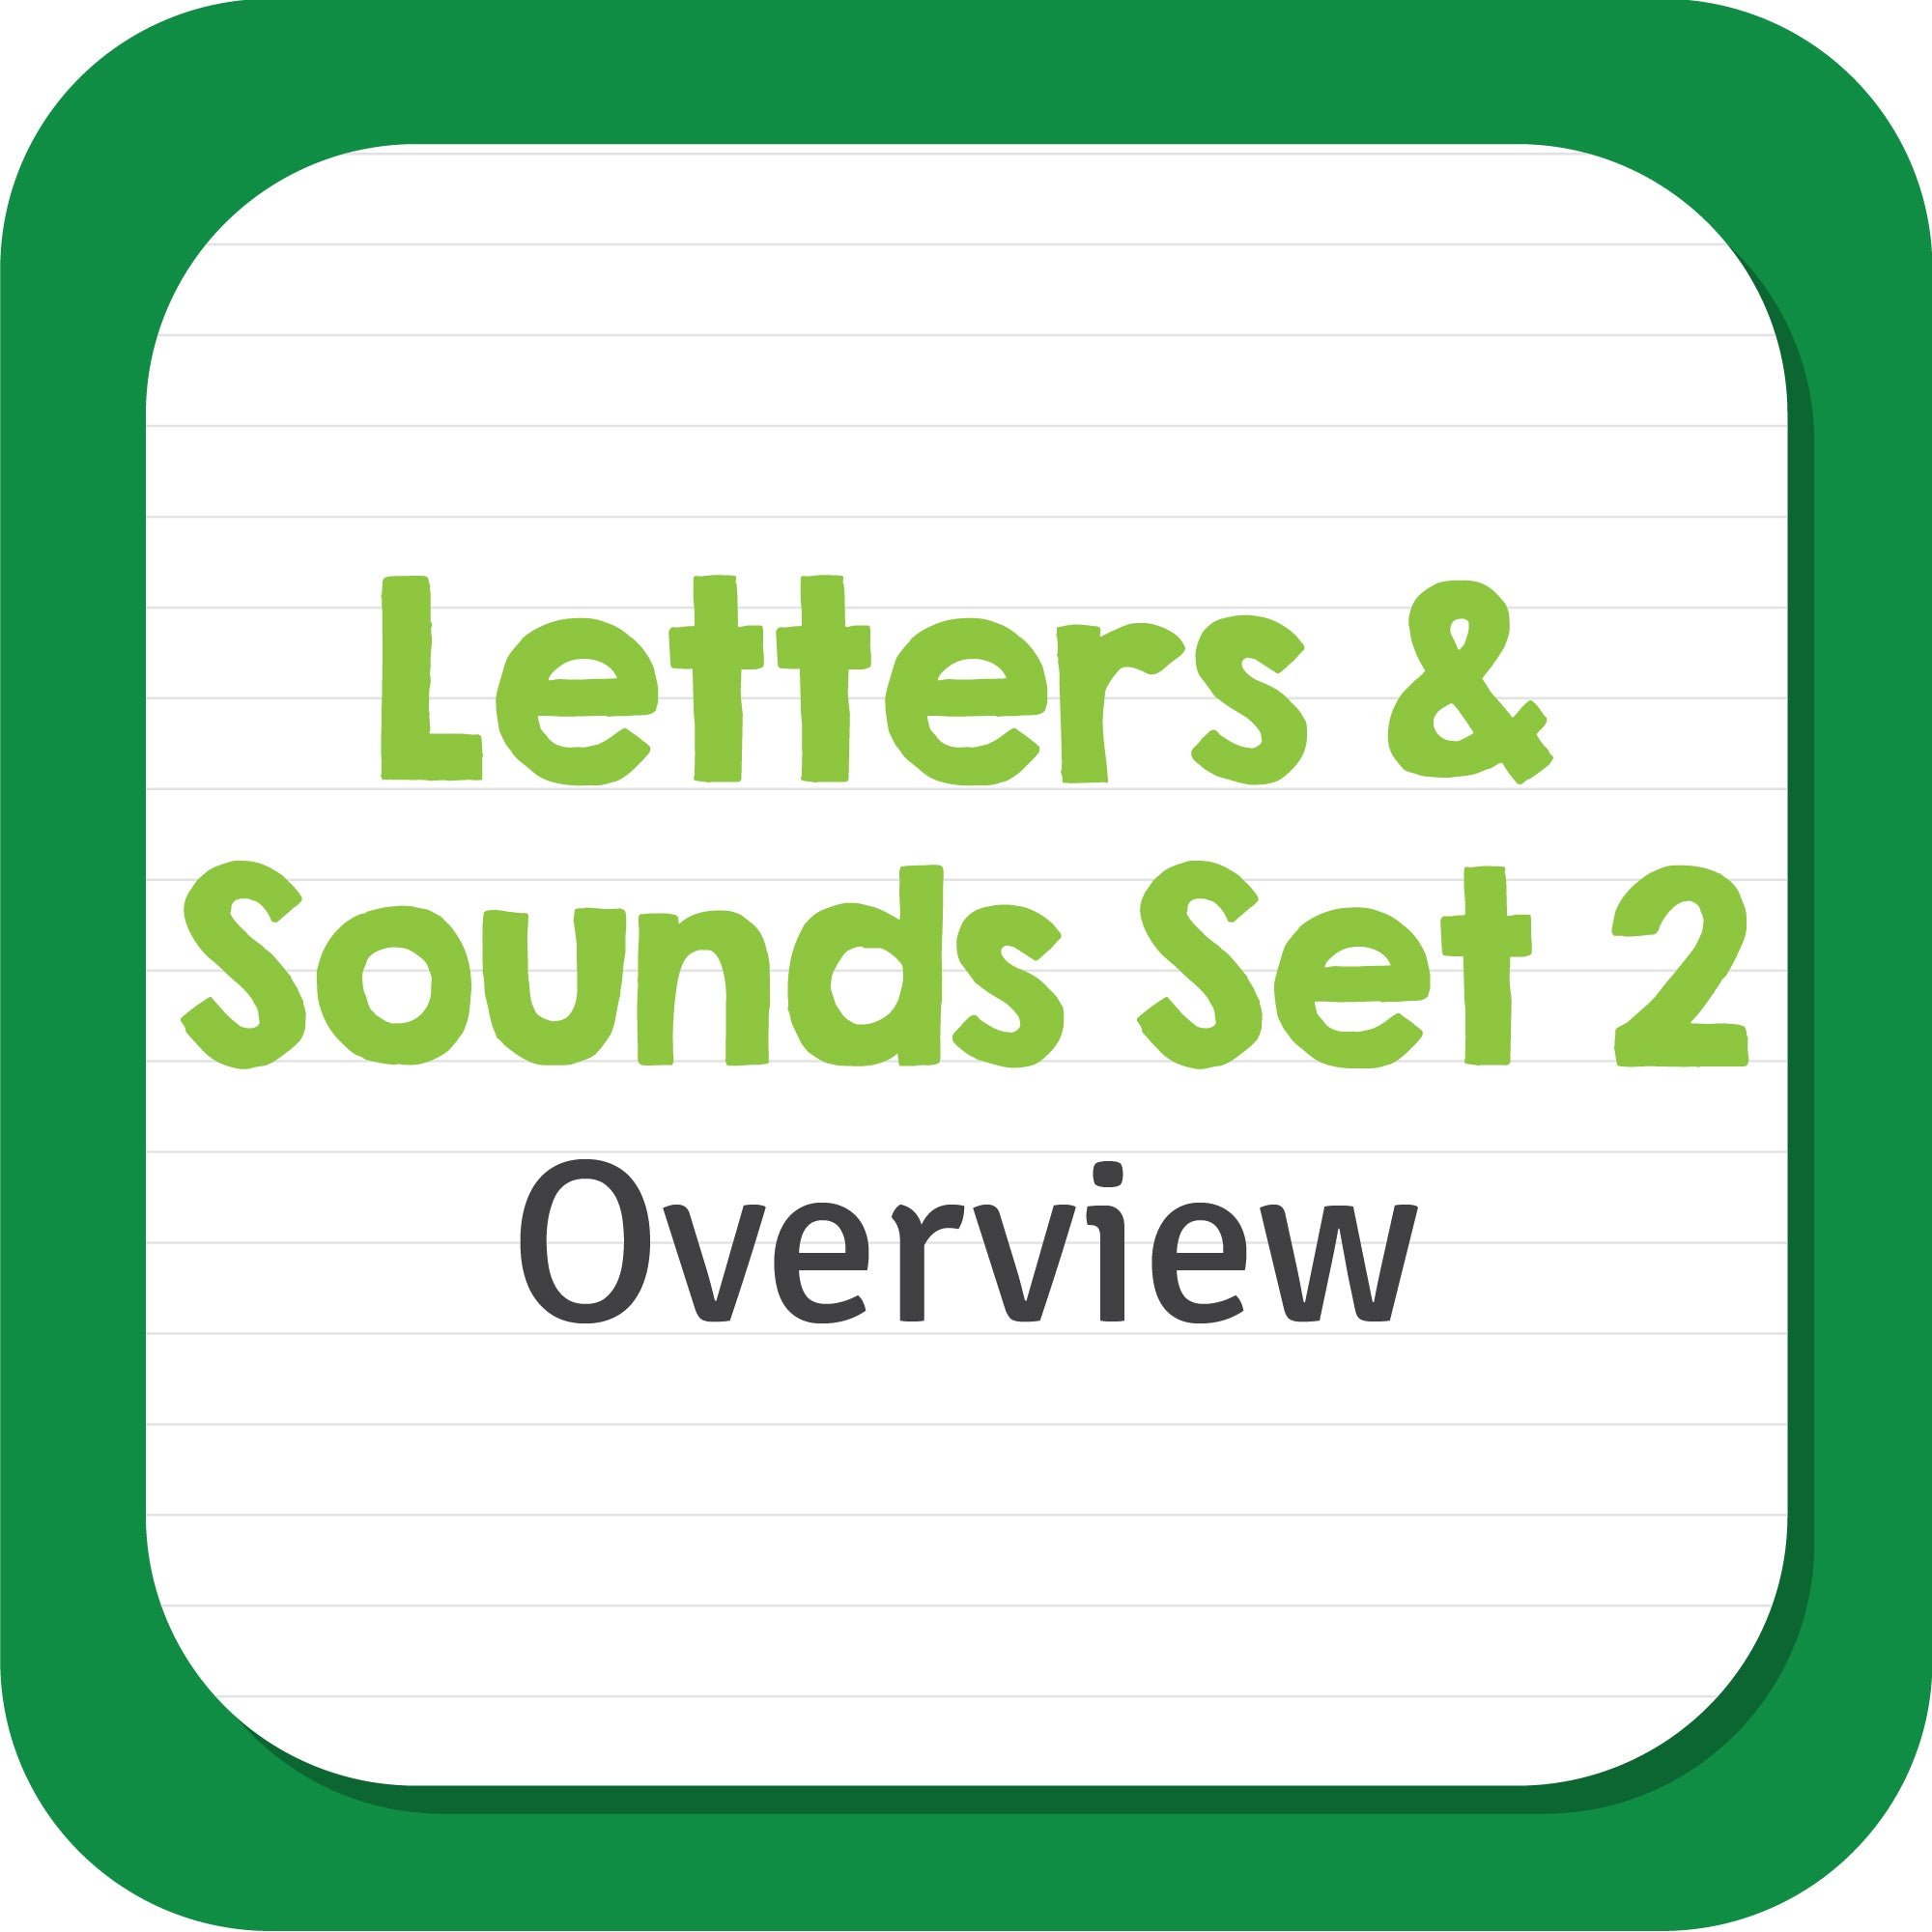 Letters and Sounds Set 2 Overview